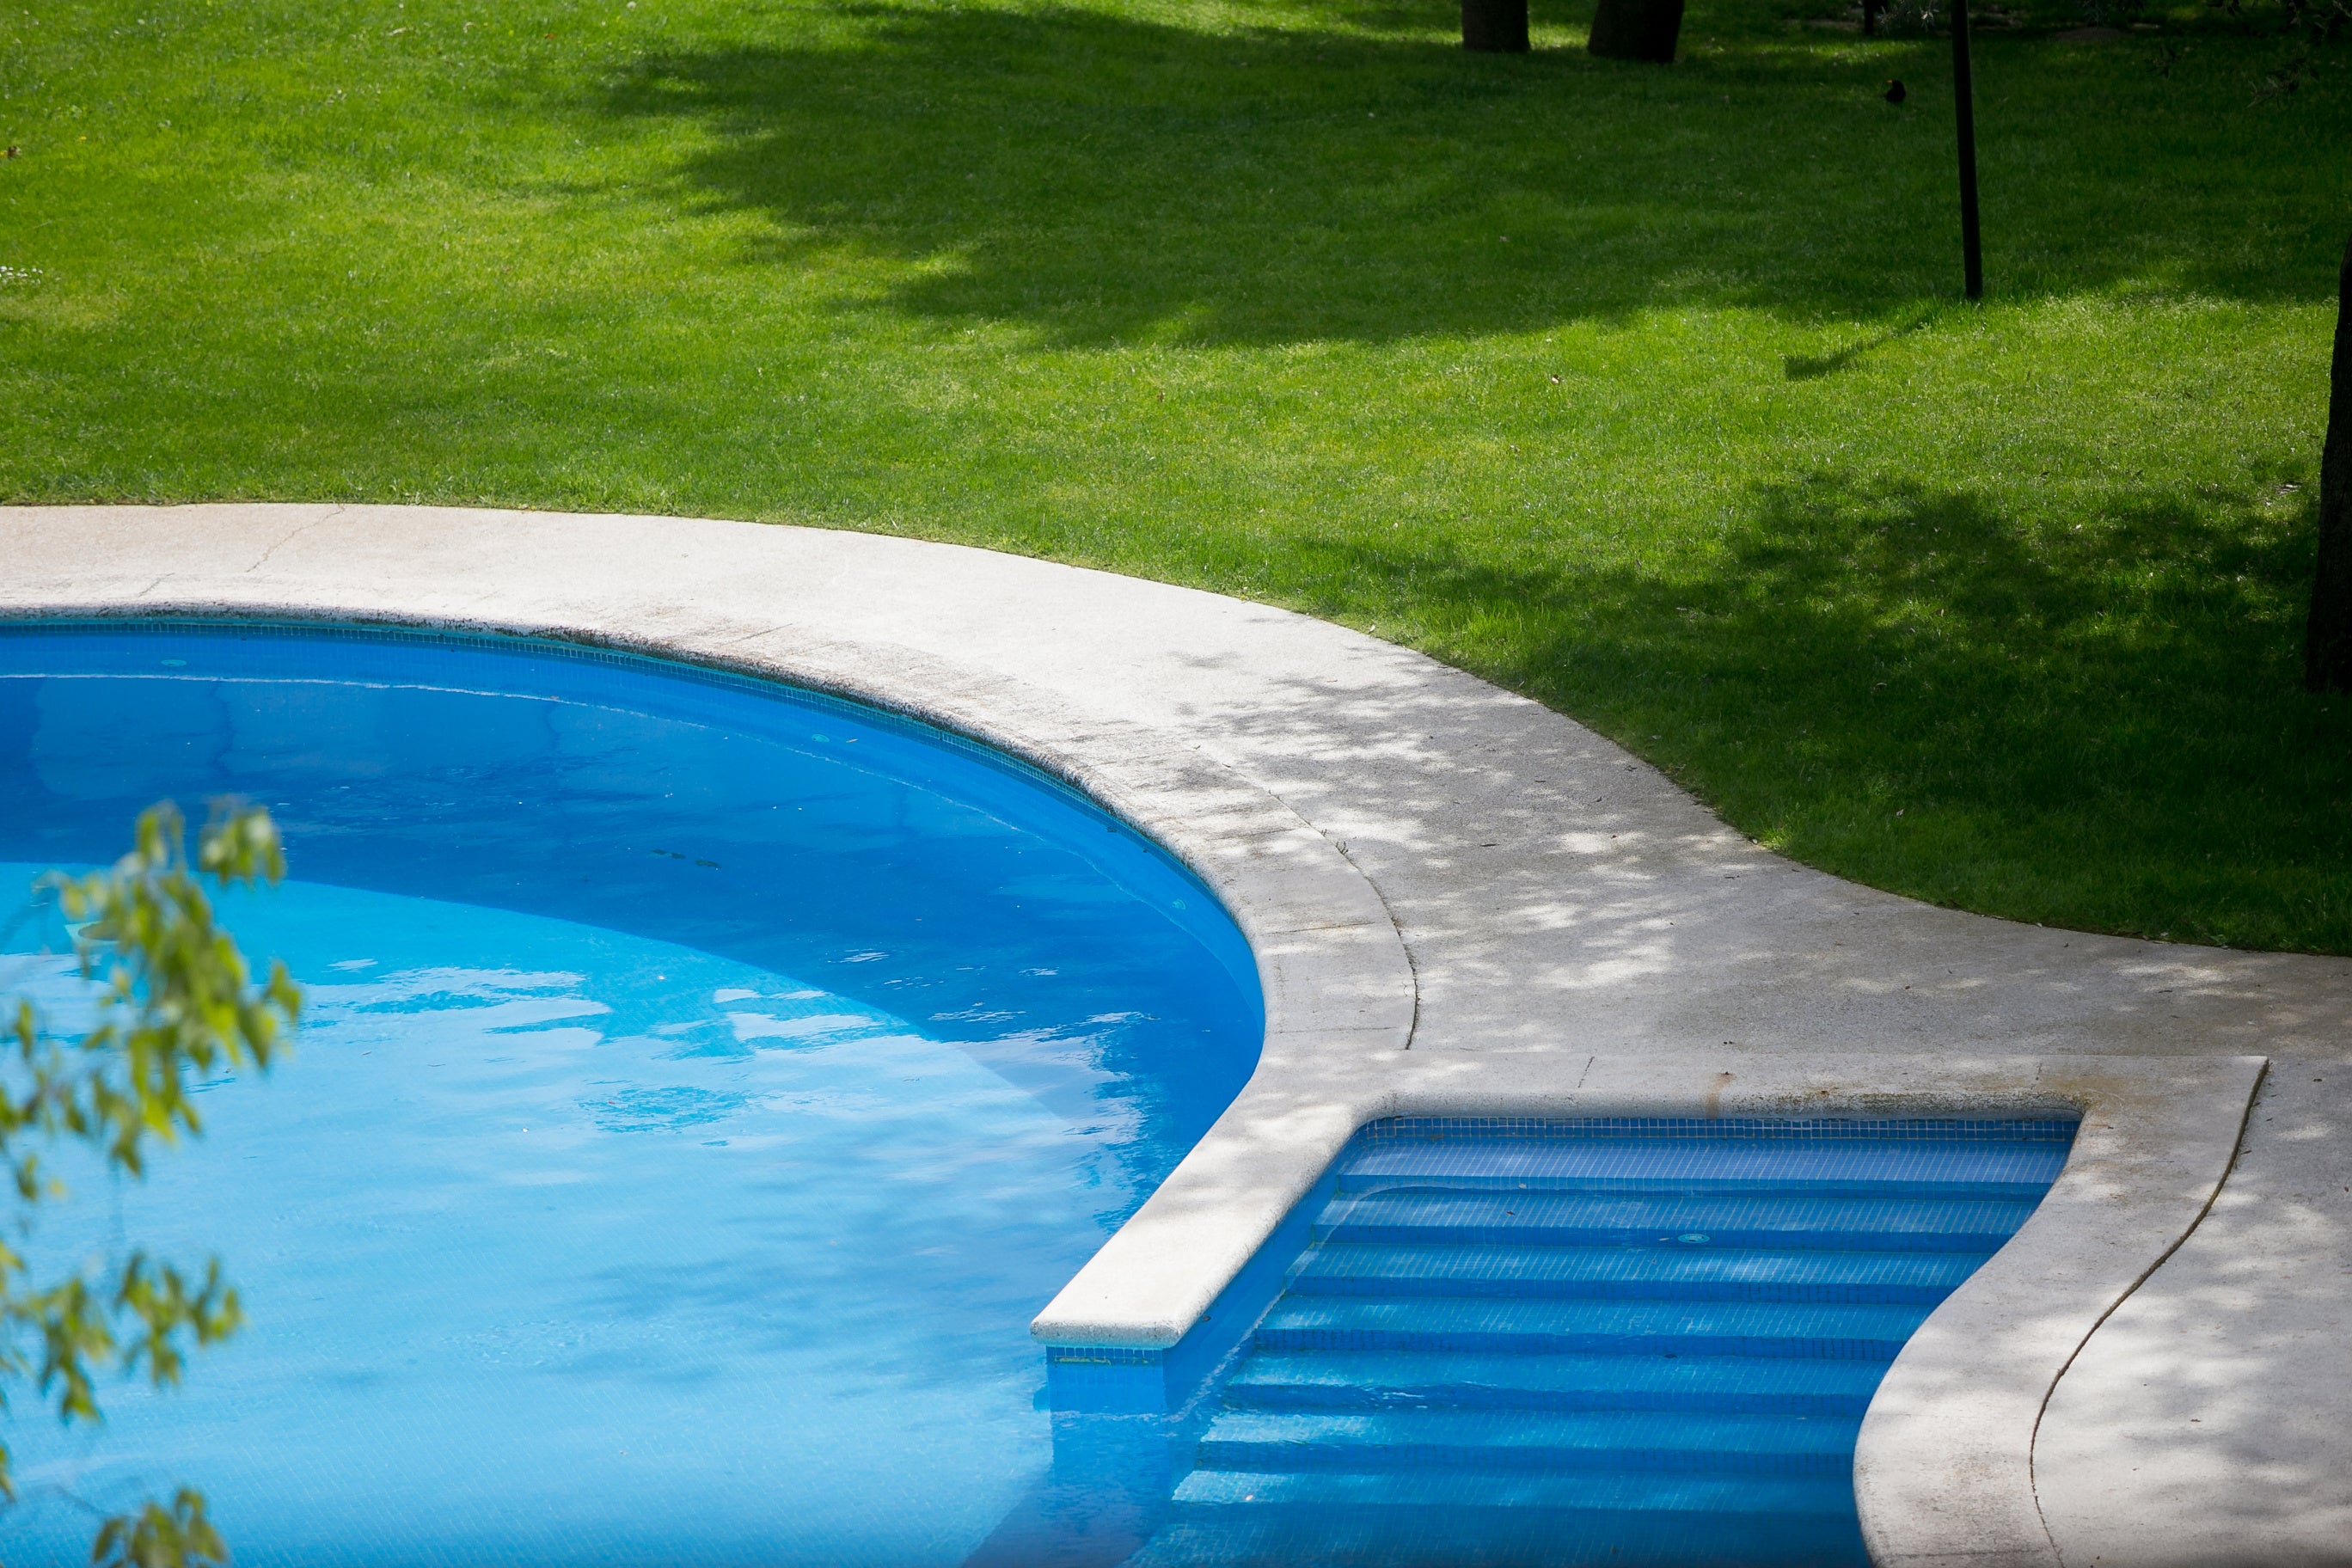 Pool and CONCRETE floor with green grass check for cracks - spring maintenance 